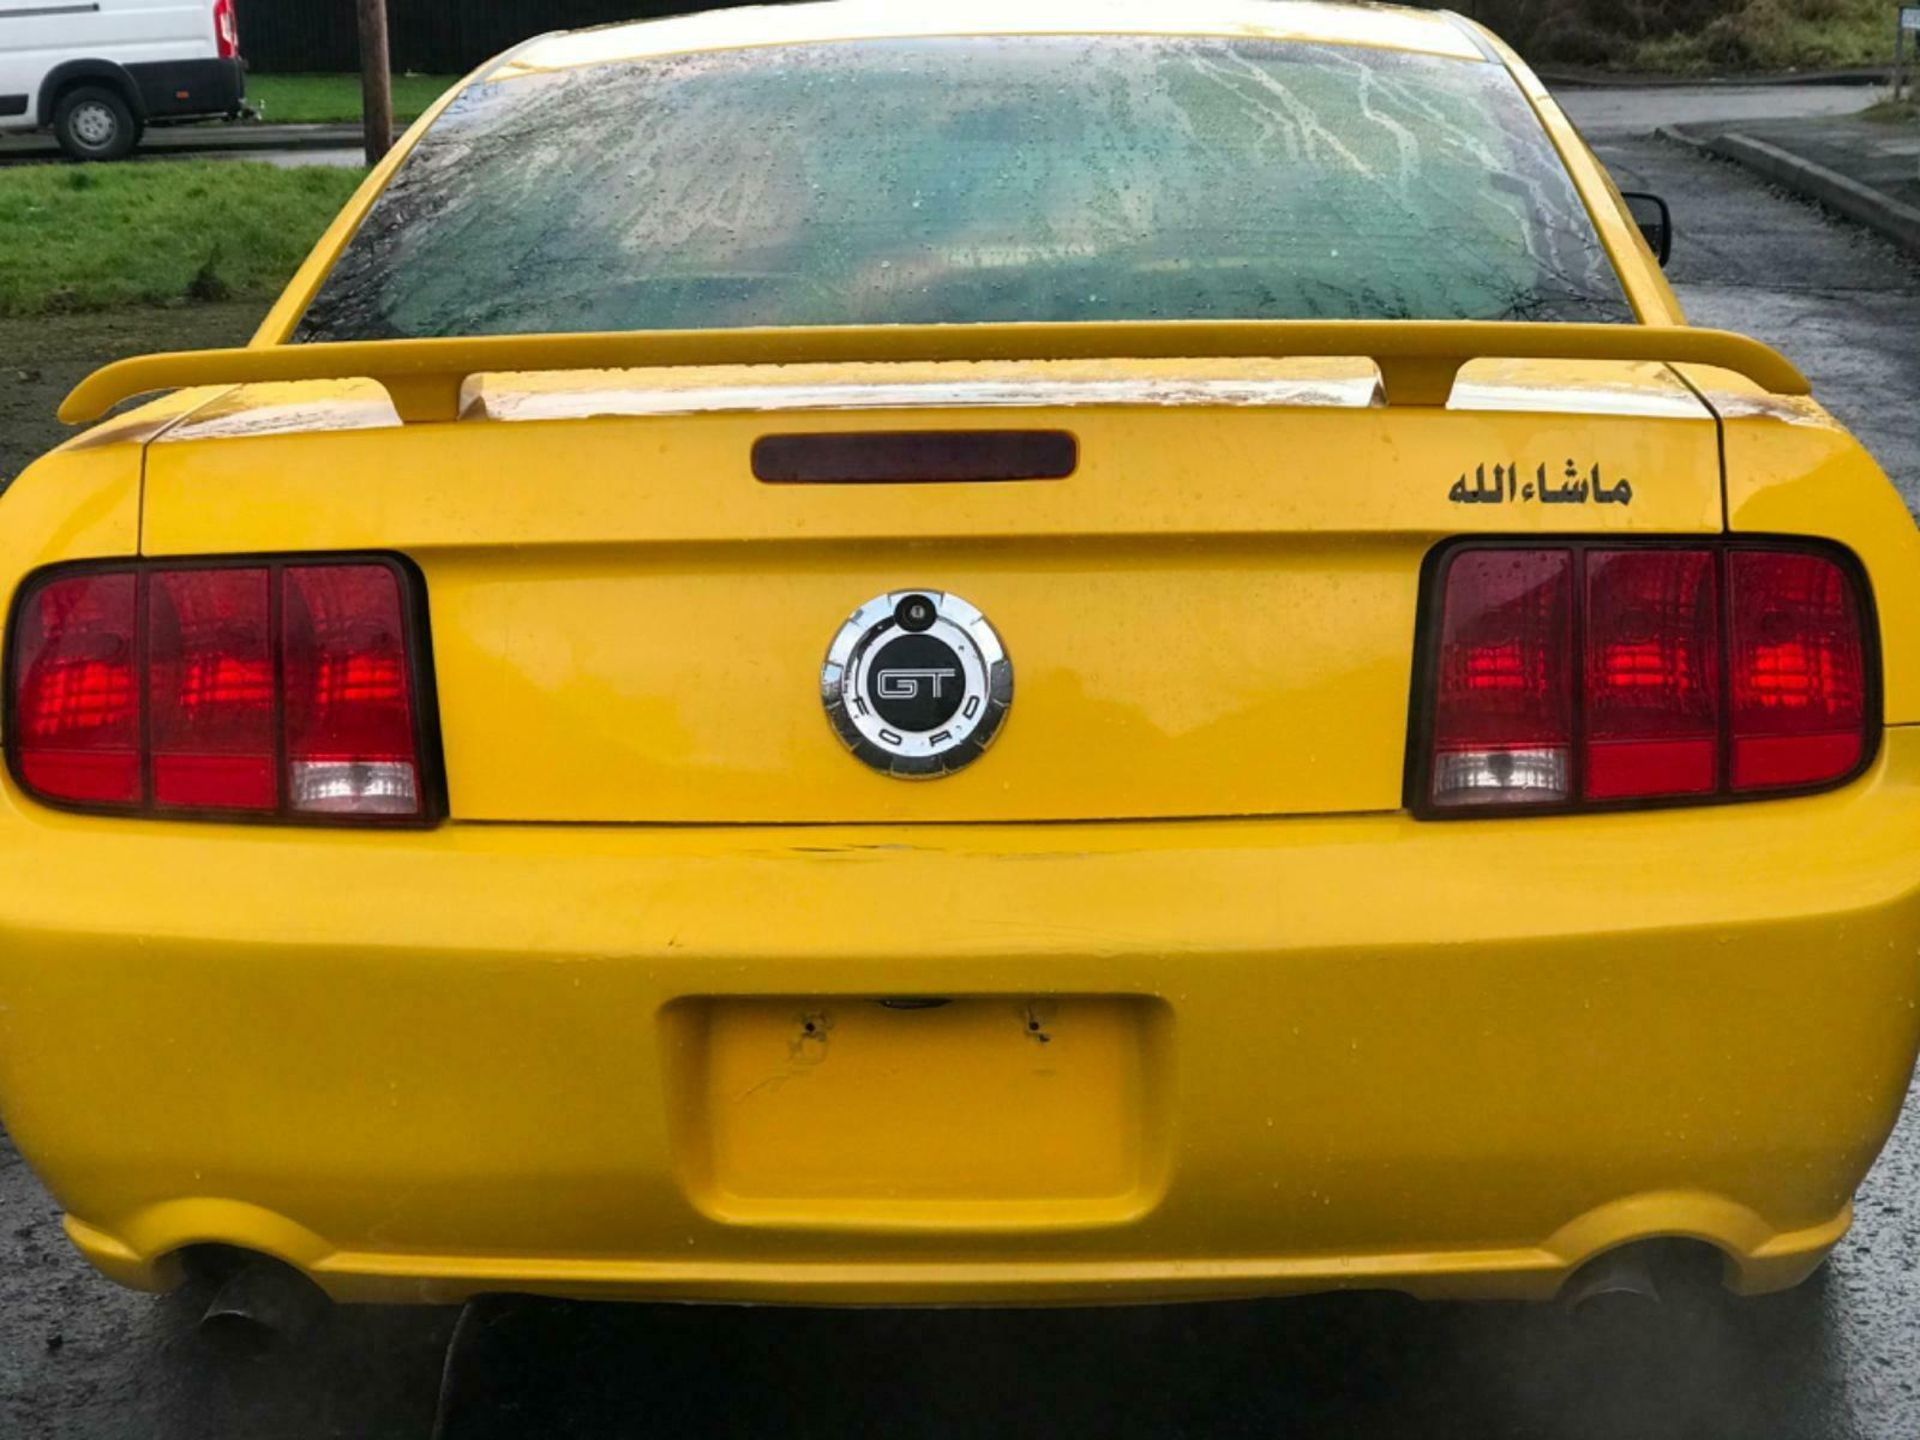 2006 FORD MUSTANG 4.6 V8 GT RARE MANUAL SCREAMING YELLOW LHD FRESH IMPORT - Image 3 of 9